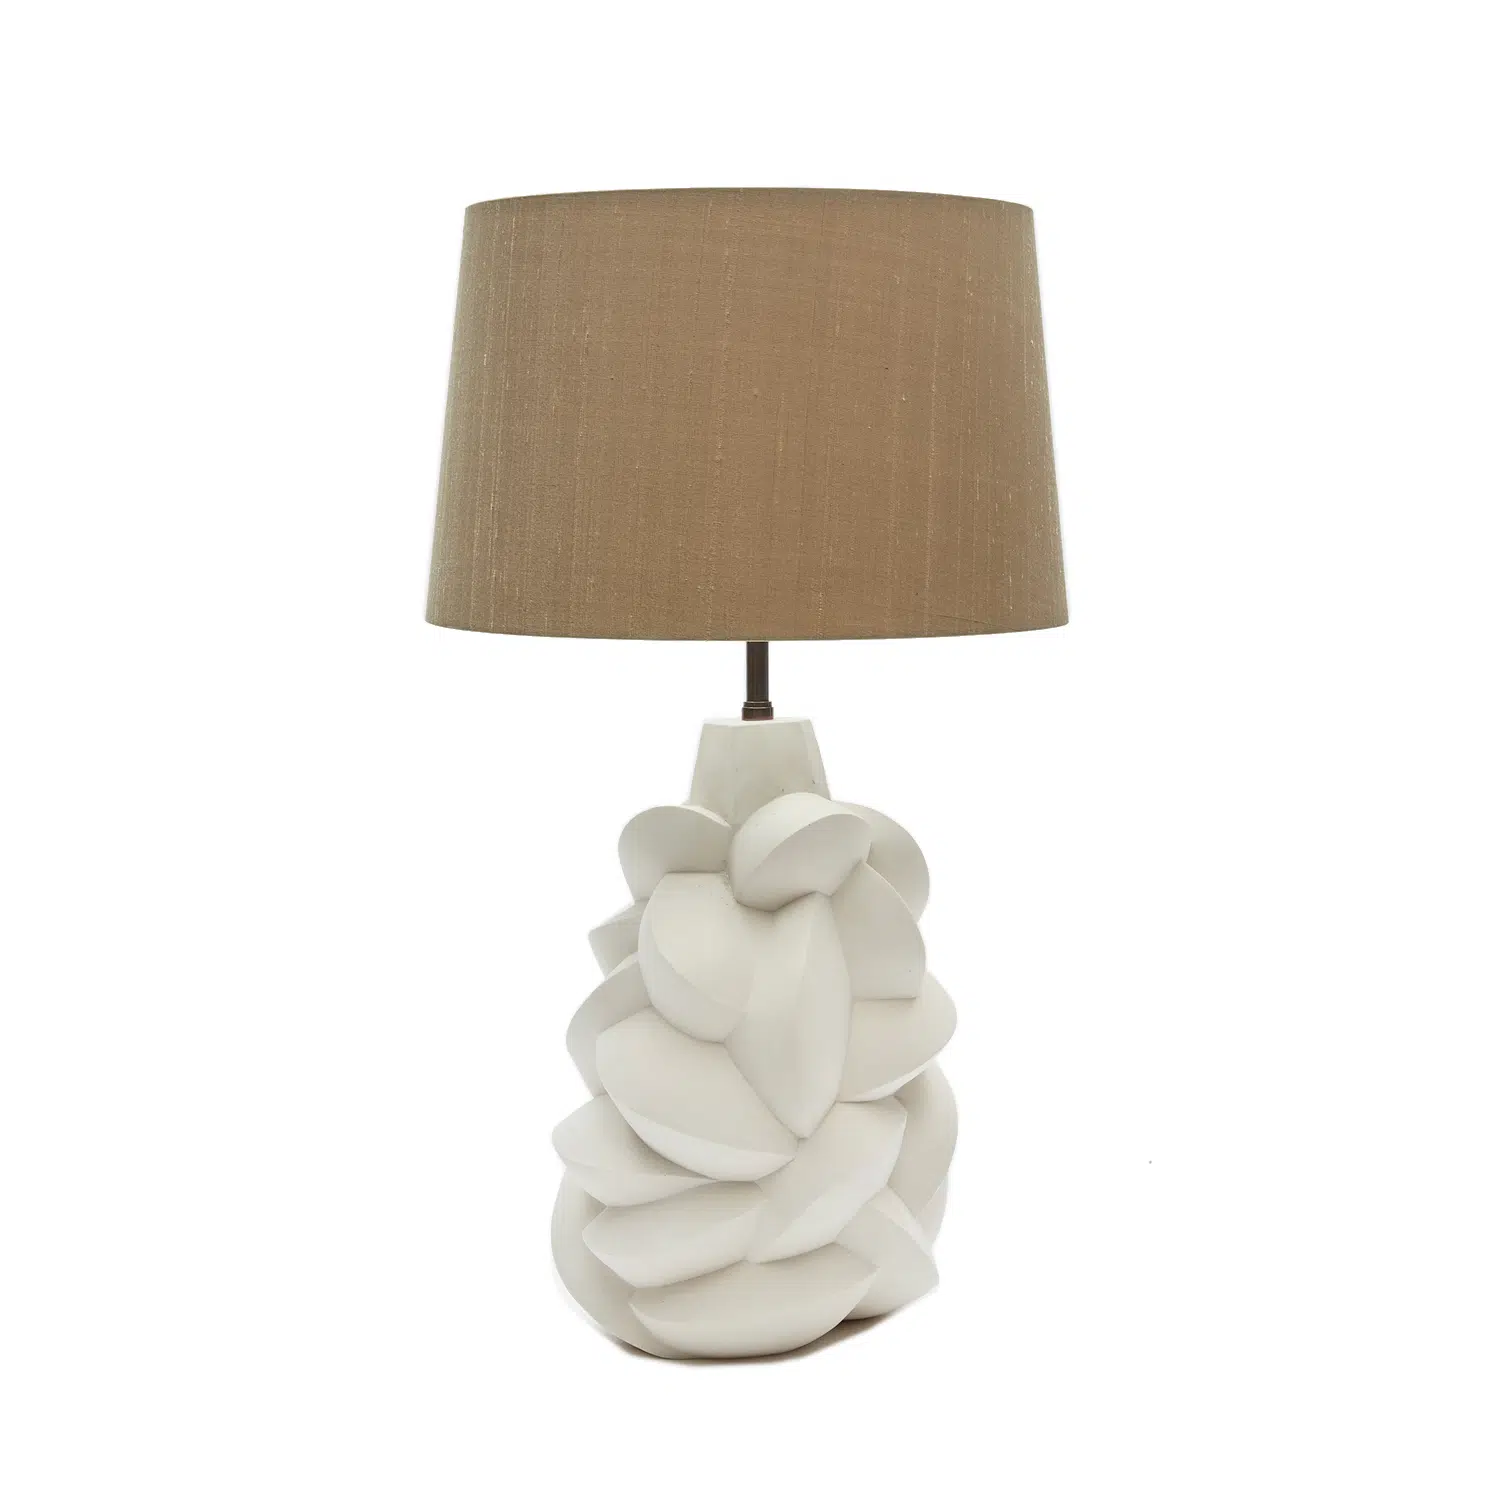 Luxury Hand-Crafted Plaster Lamp